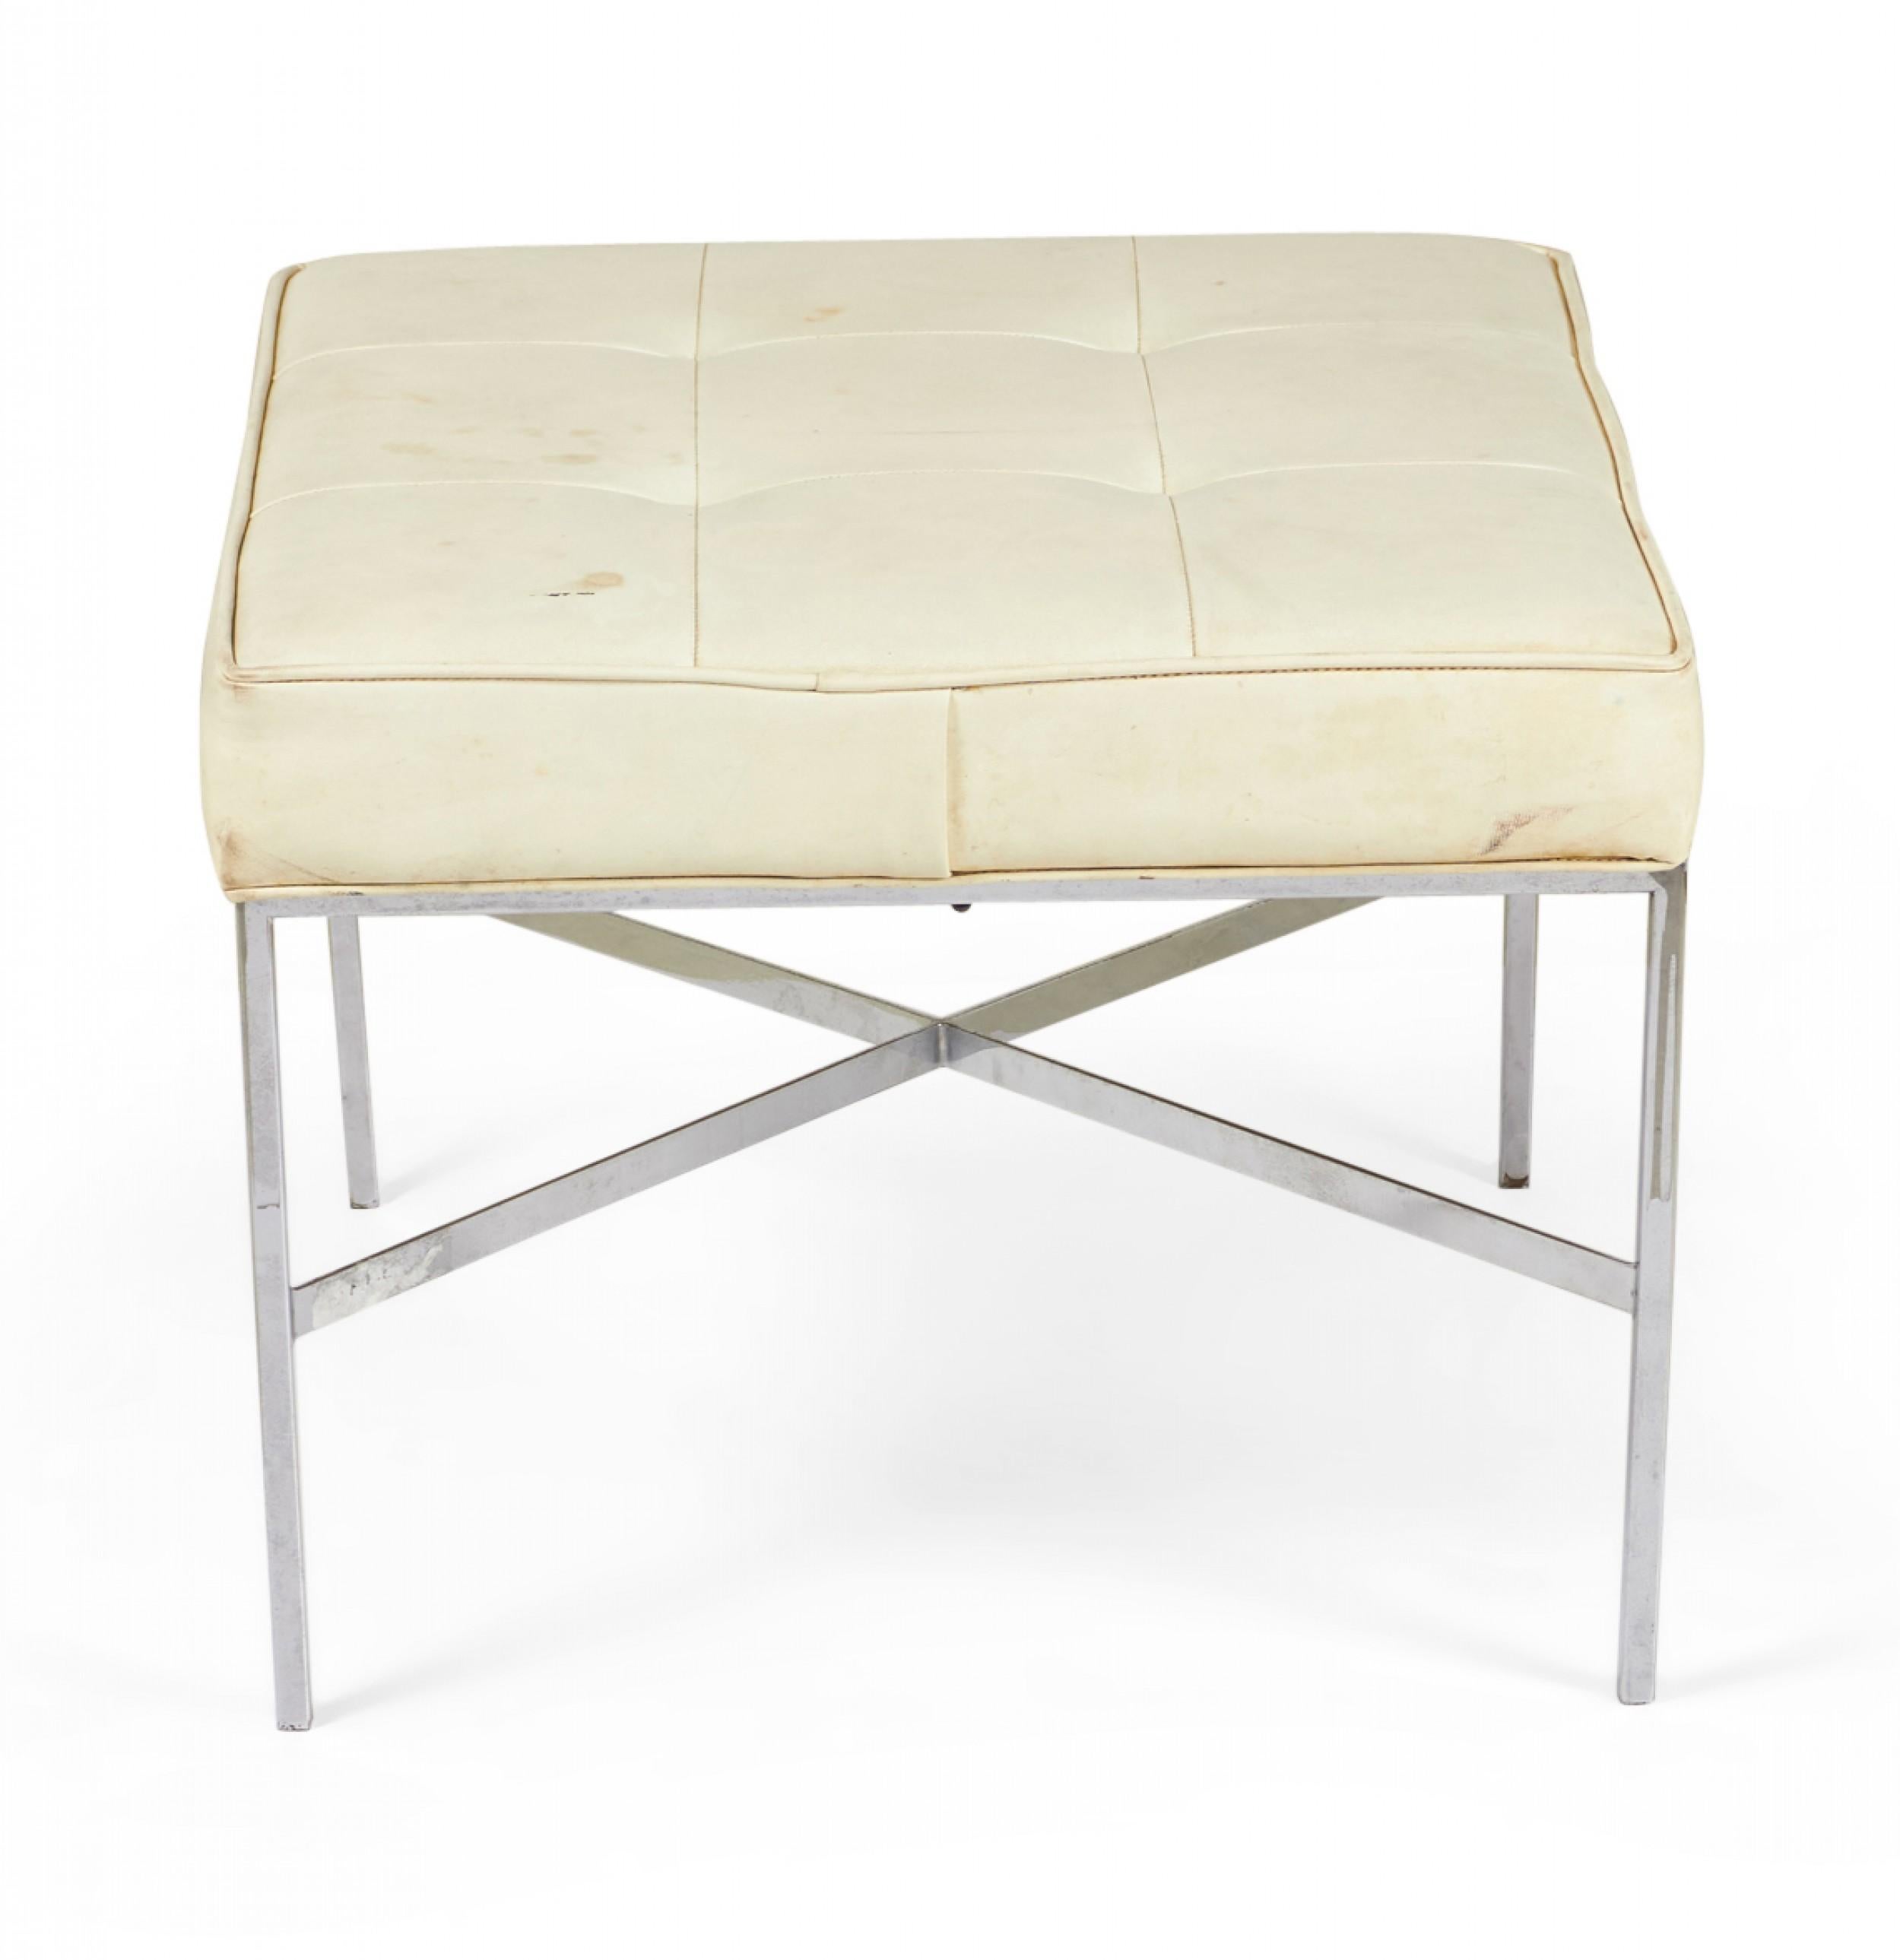 Modern Design Institute of Chrome and Button Tufted White Vinyl Square Bench For Sale